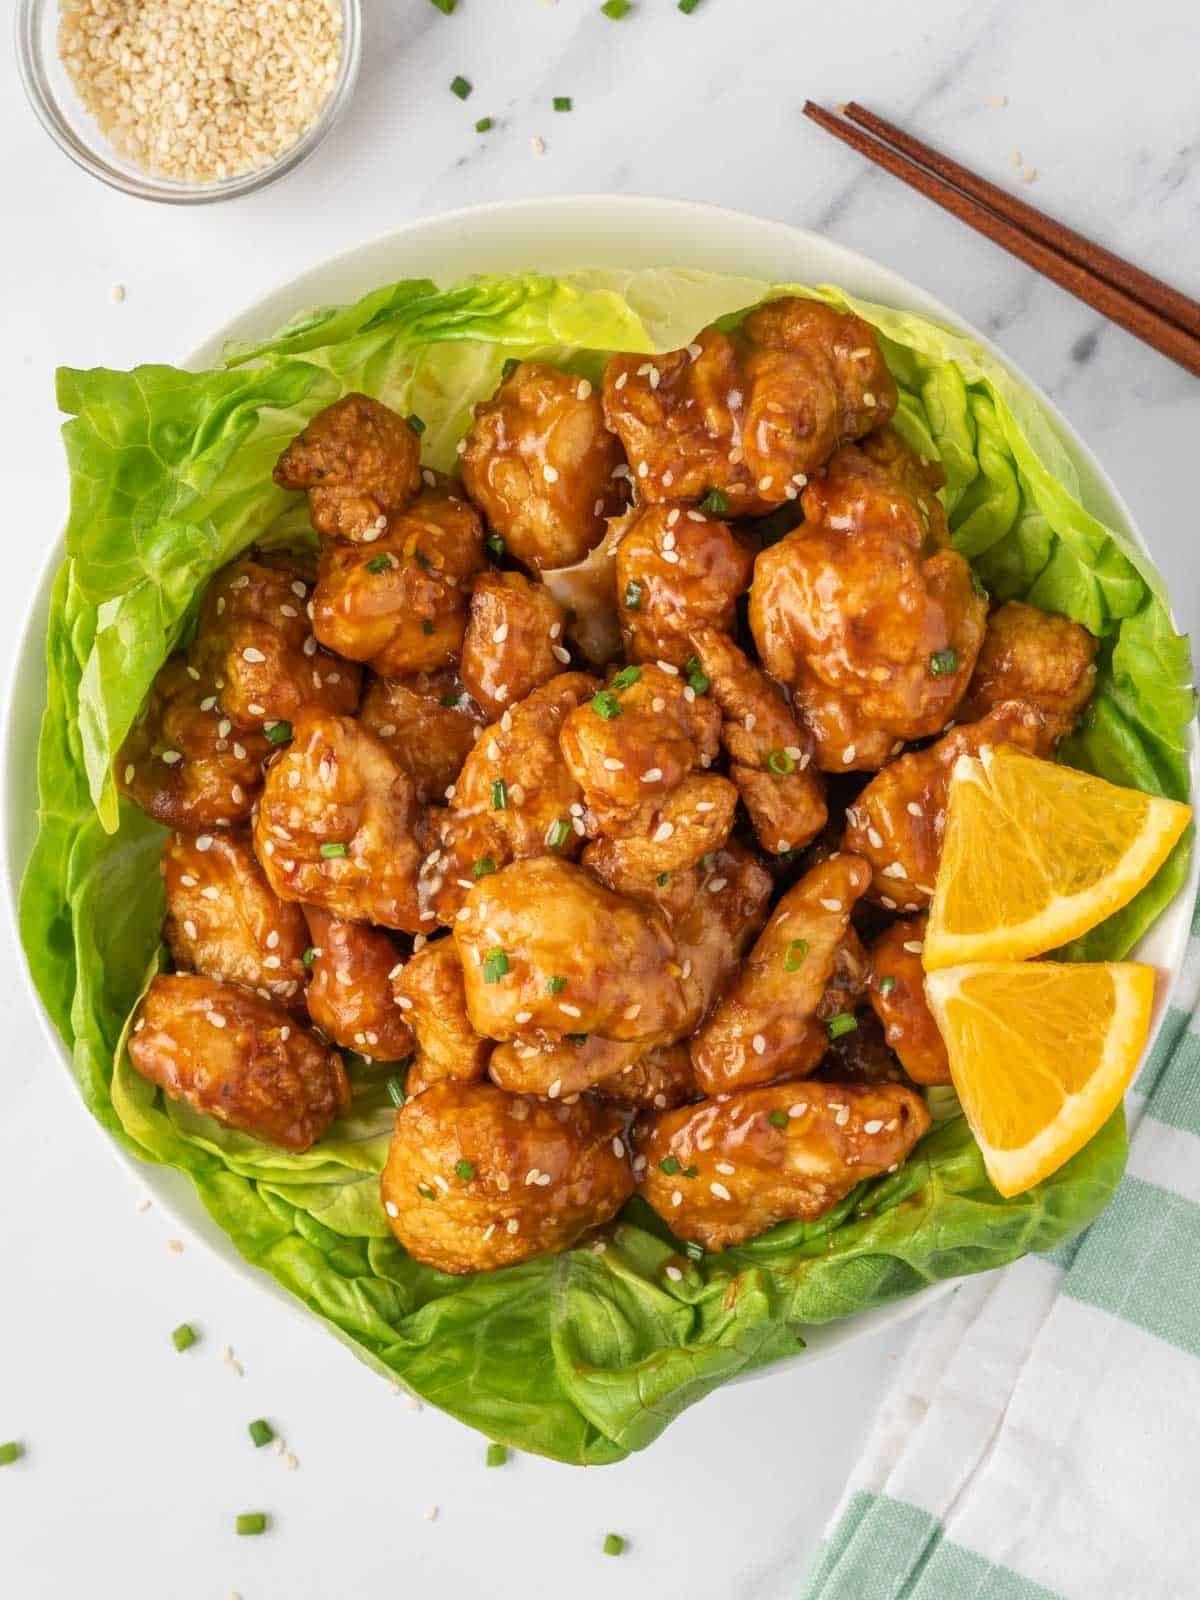 Chicken with easy orange chicken sauce served over a bed of lettuce.